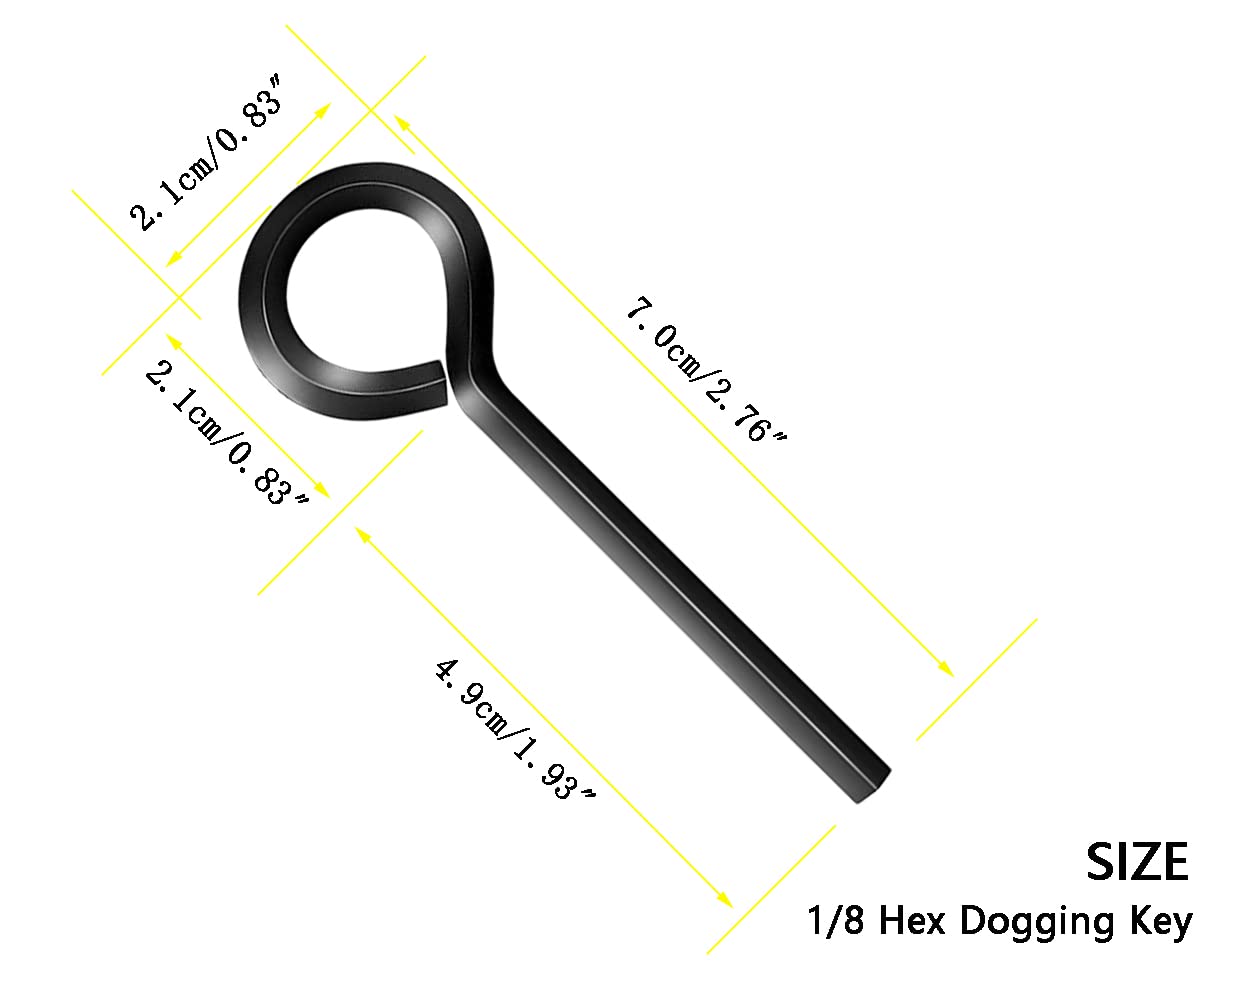 WOODGUILIN 1/8” Standard Hex Dogging Key with Full Loop, Key-Ring Style Dogging Key Set 1/8 Allen Wrench Key for Push Bar Door Panic Bars, Security Door Exit Devices,Solid Metal（10 Pack,1/8 black）